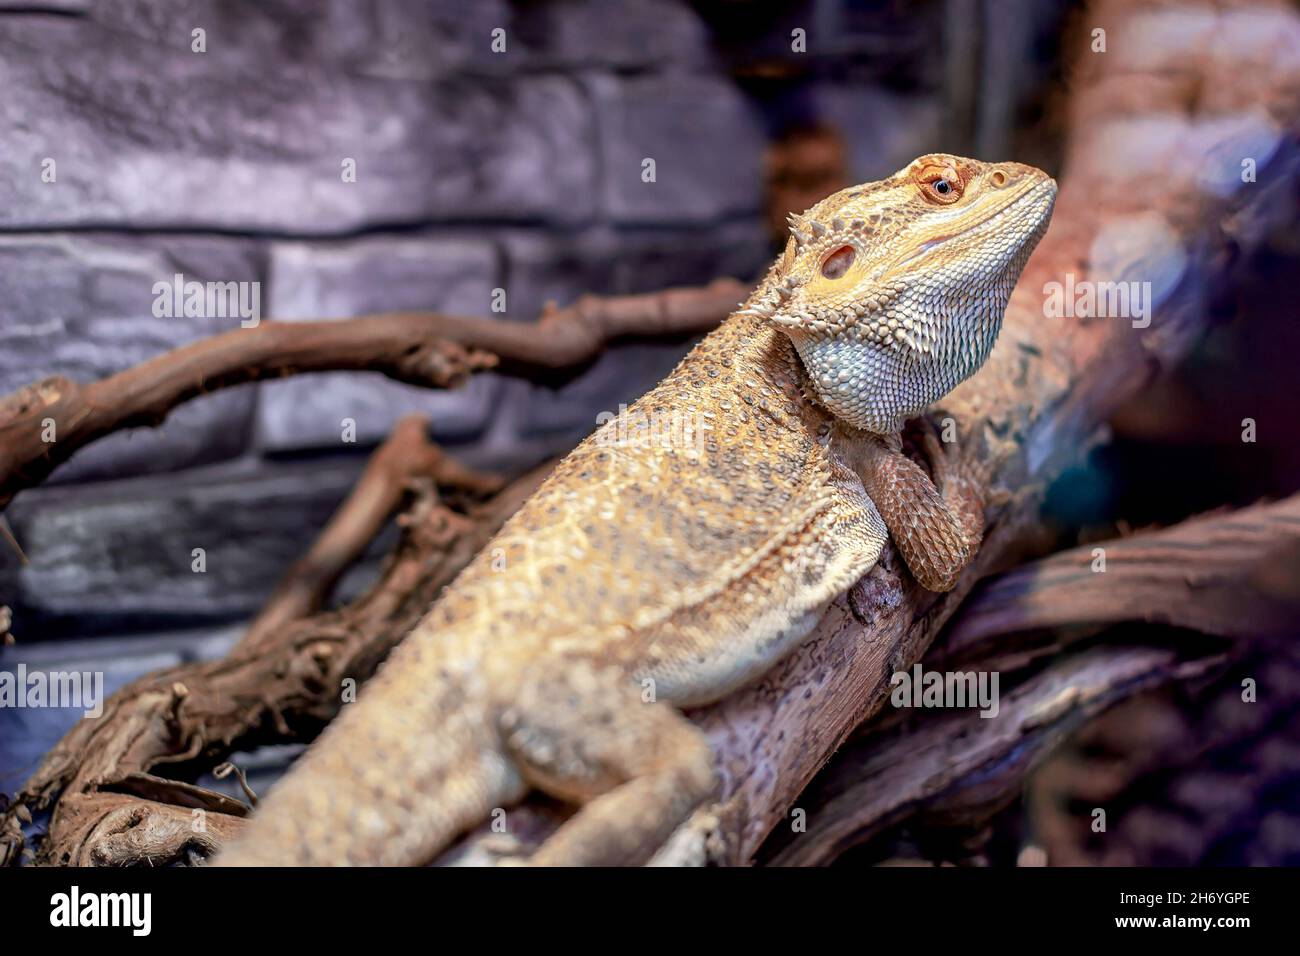 Root Bearded Dragon or Agama lizard reptile on the tree branch in ...